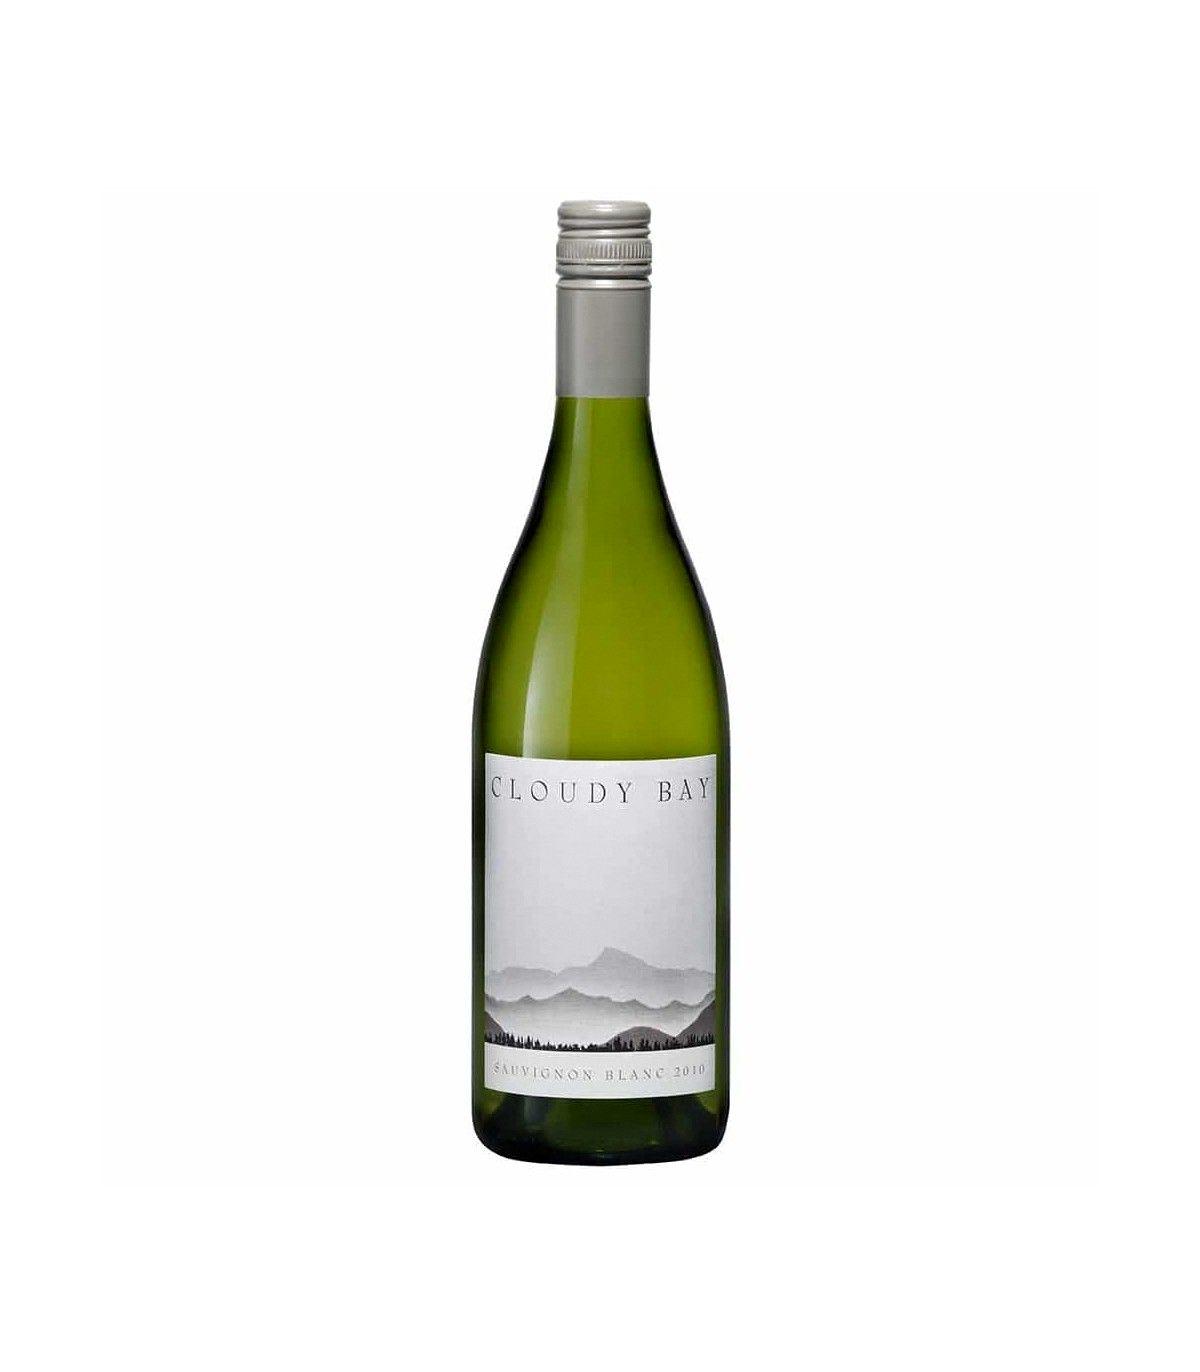 where to buy cloudy bay wine